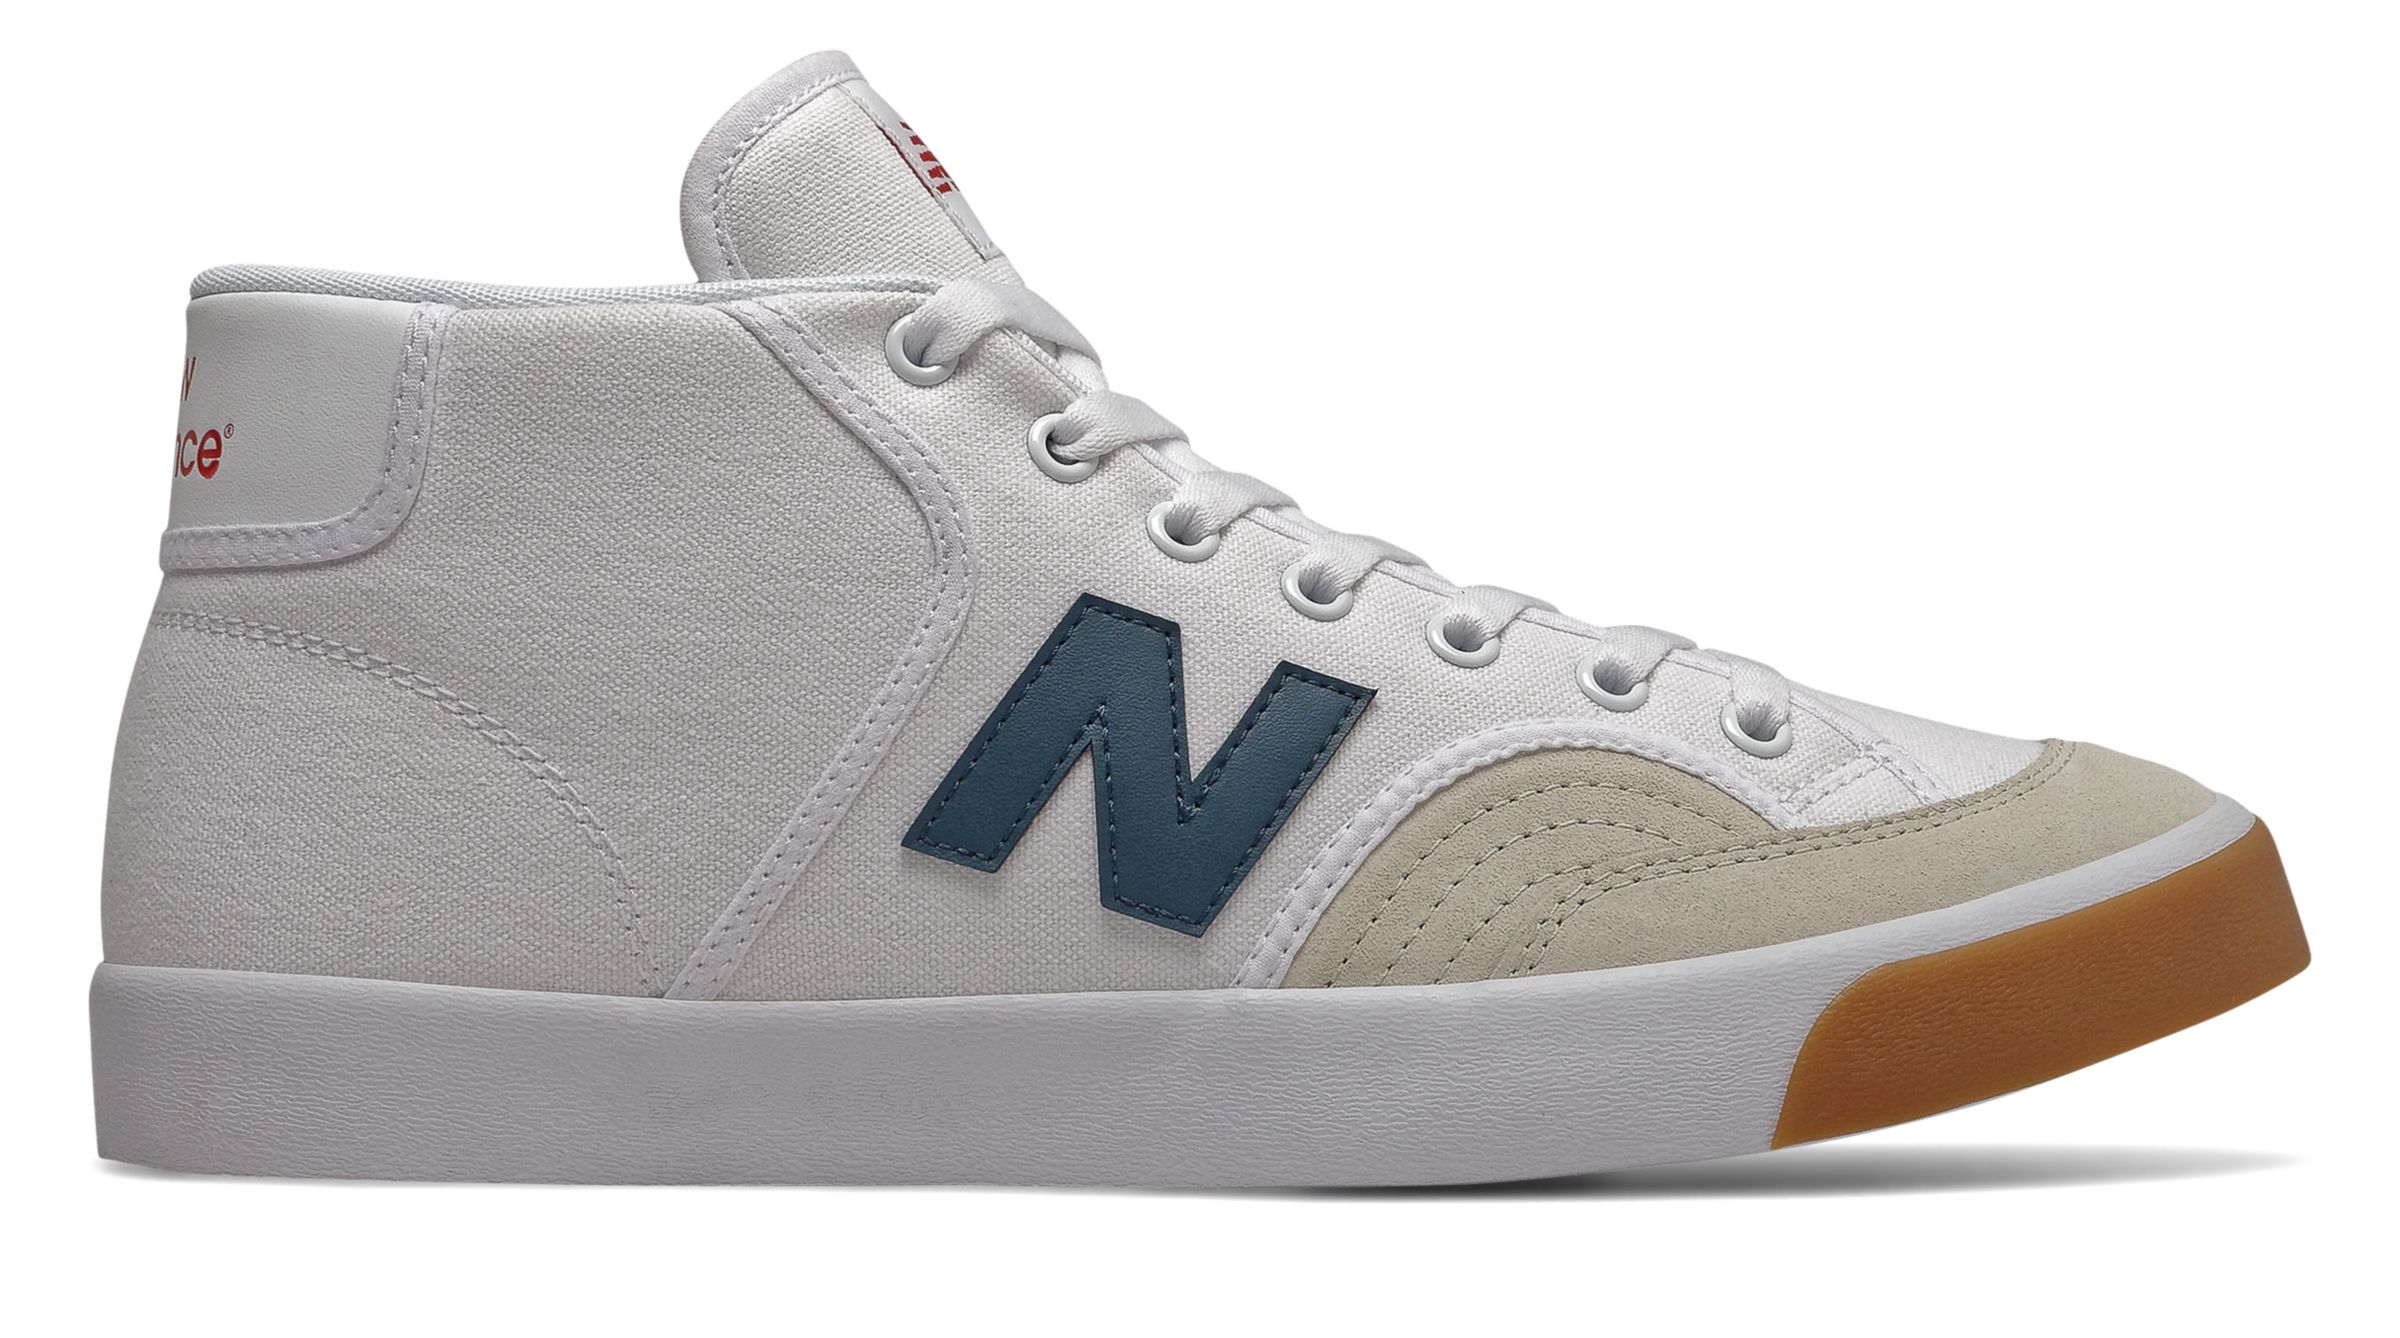 high top new balance shoes